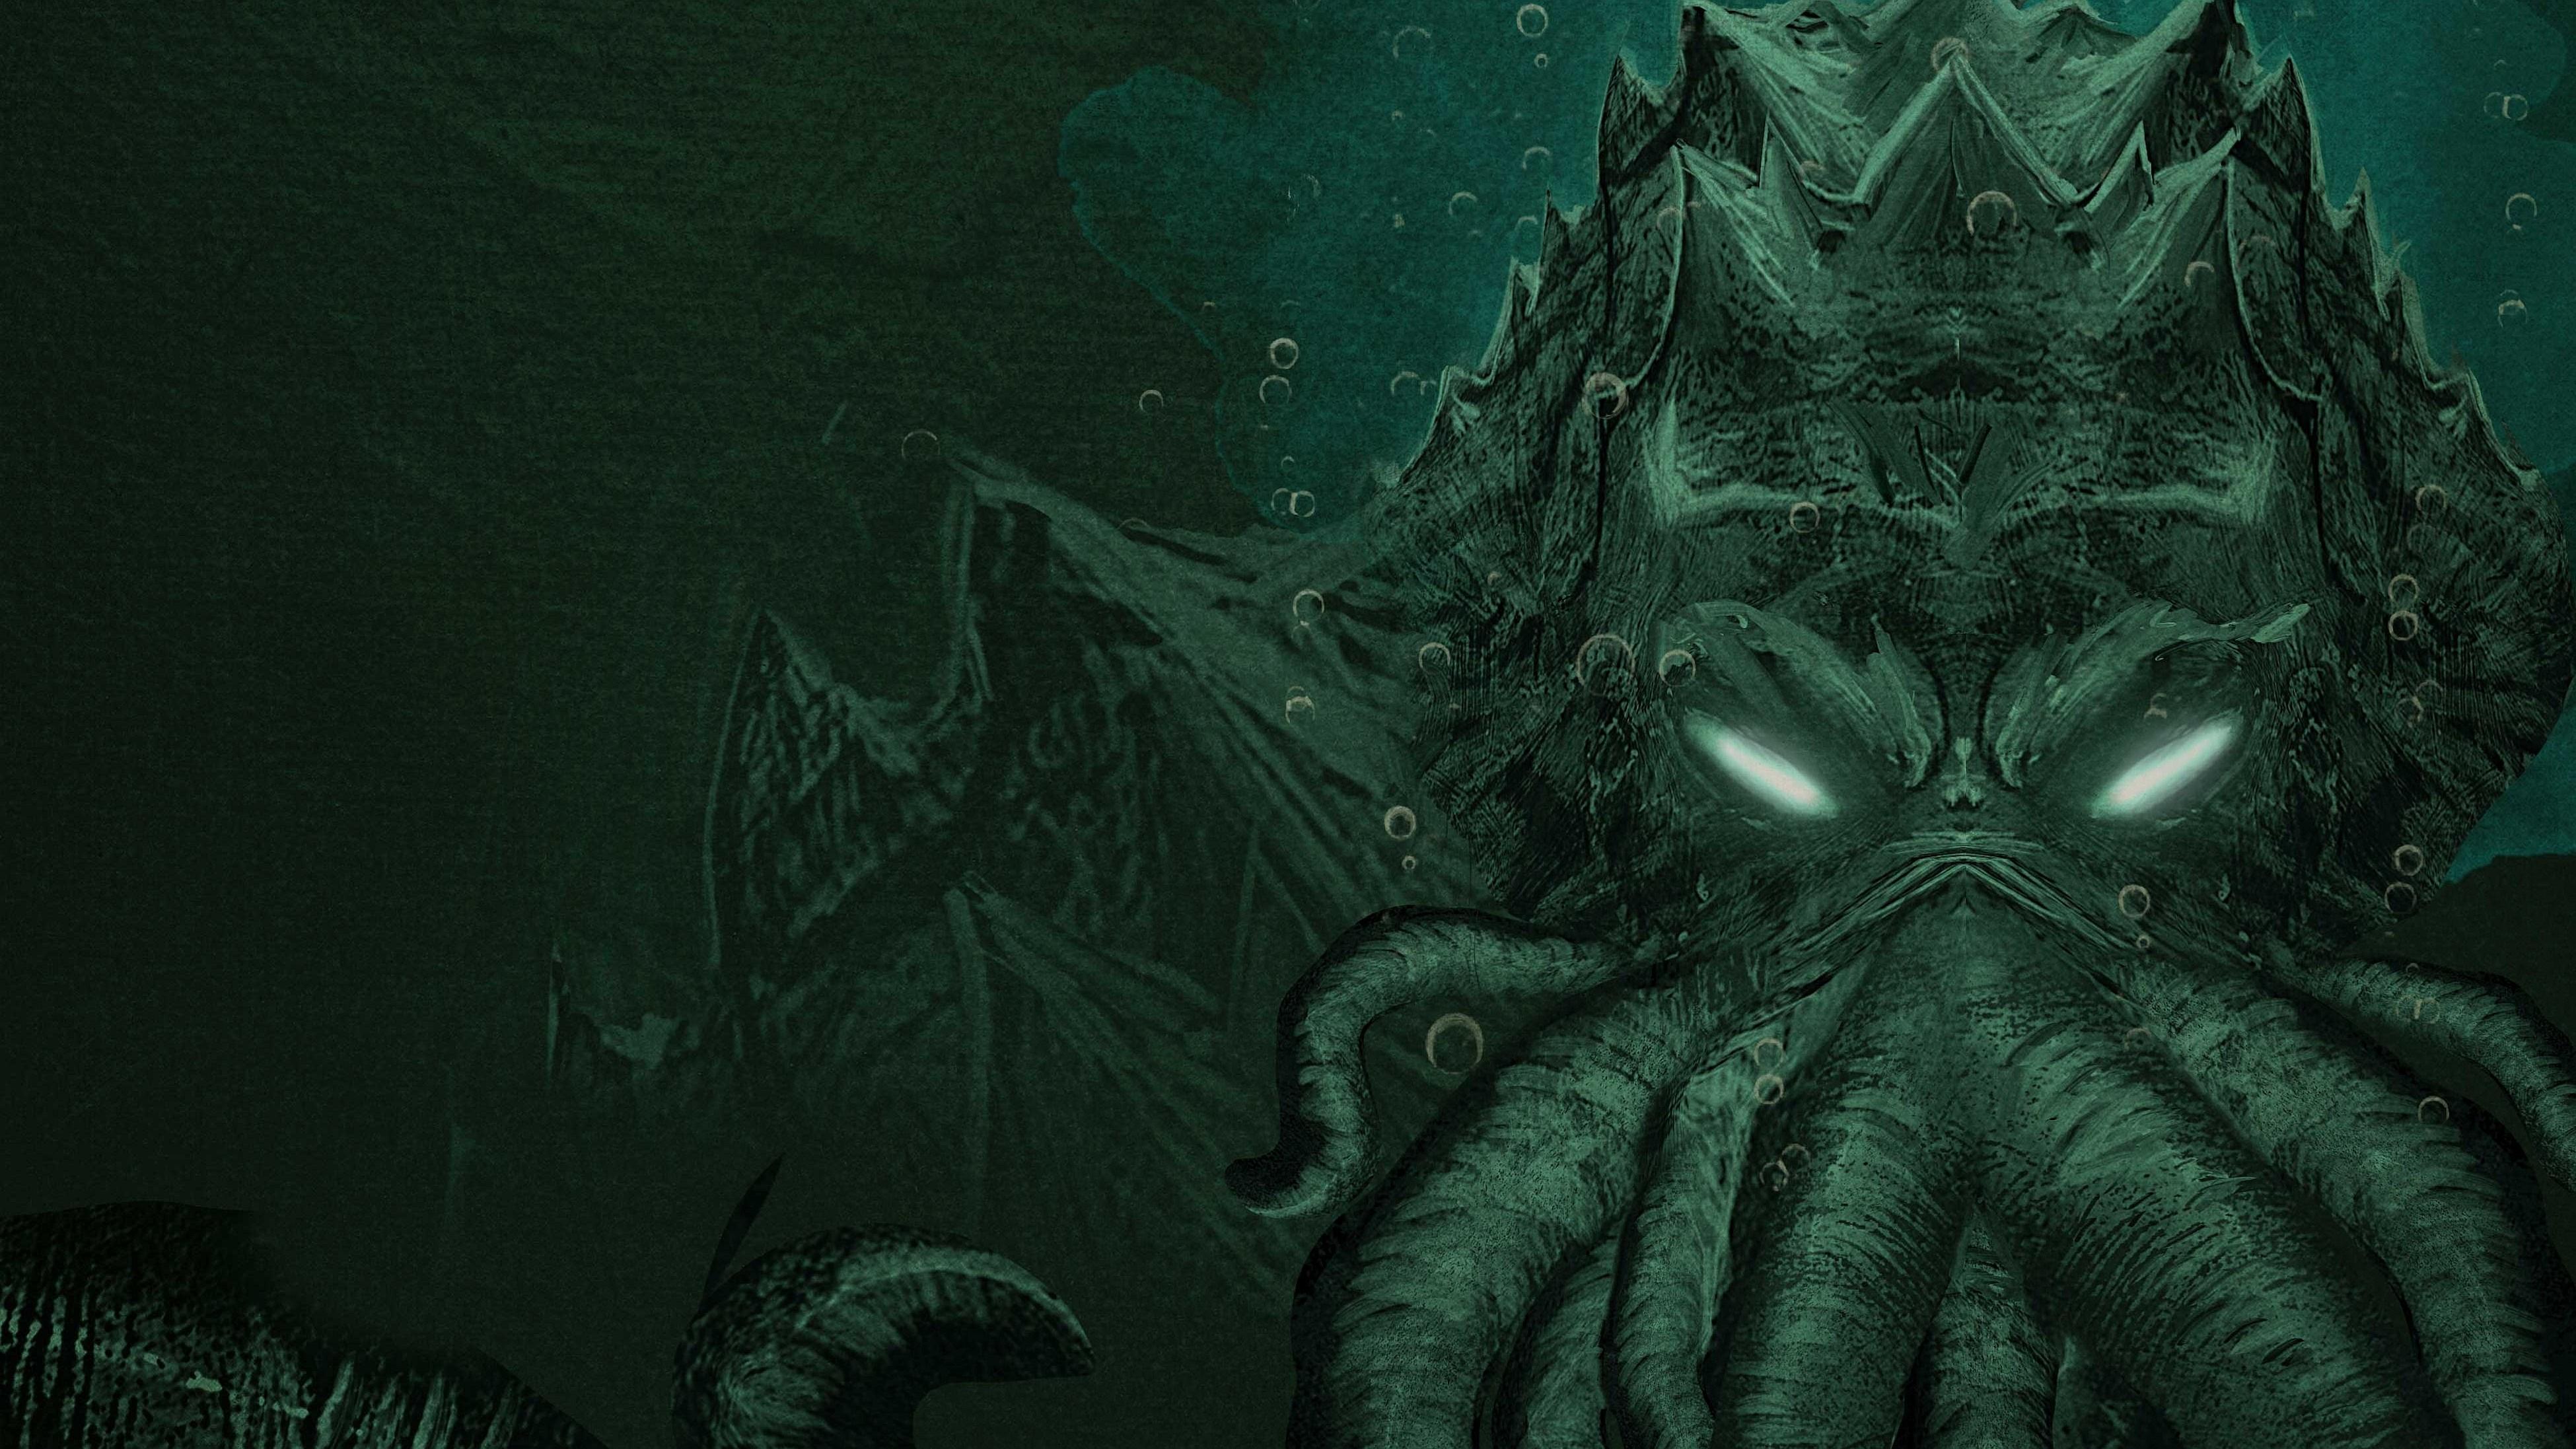 HD wallpaper, 3900X2194 Free Screensaver Wallpapers For Cthulhu